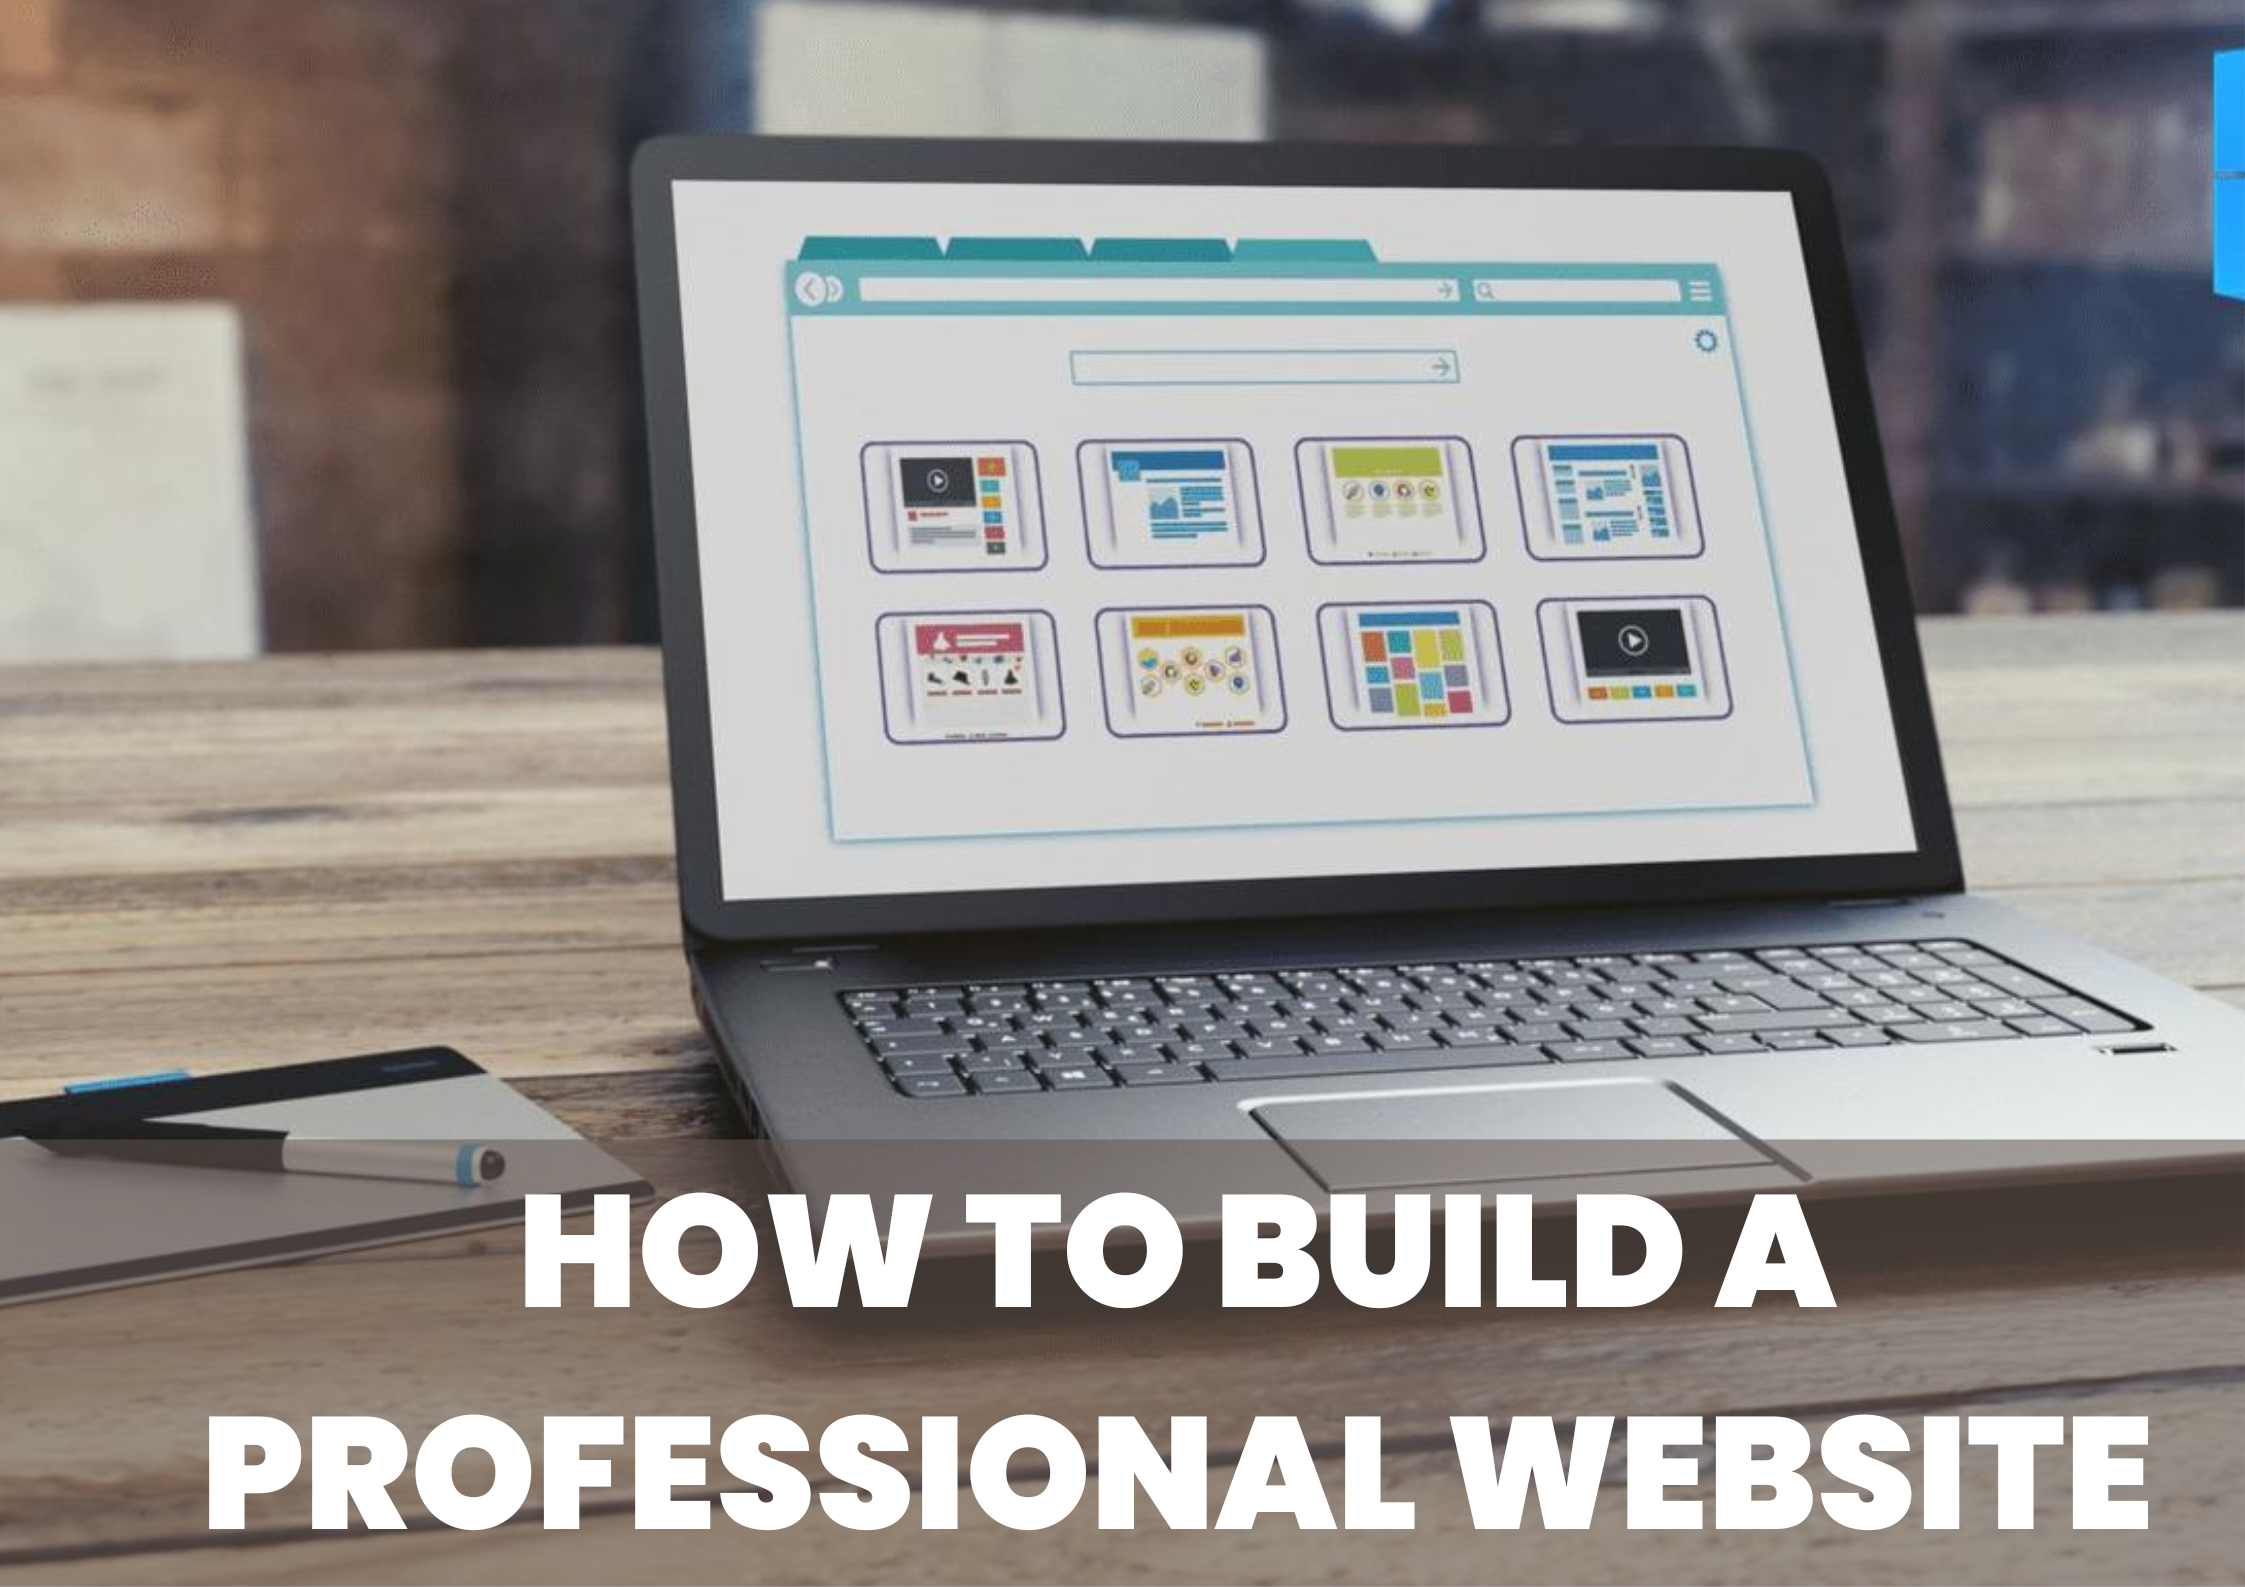 How to build a professional website